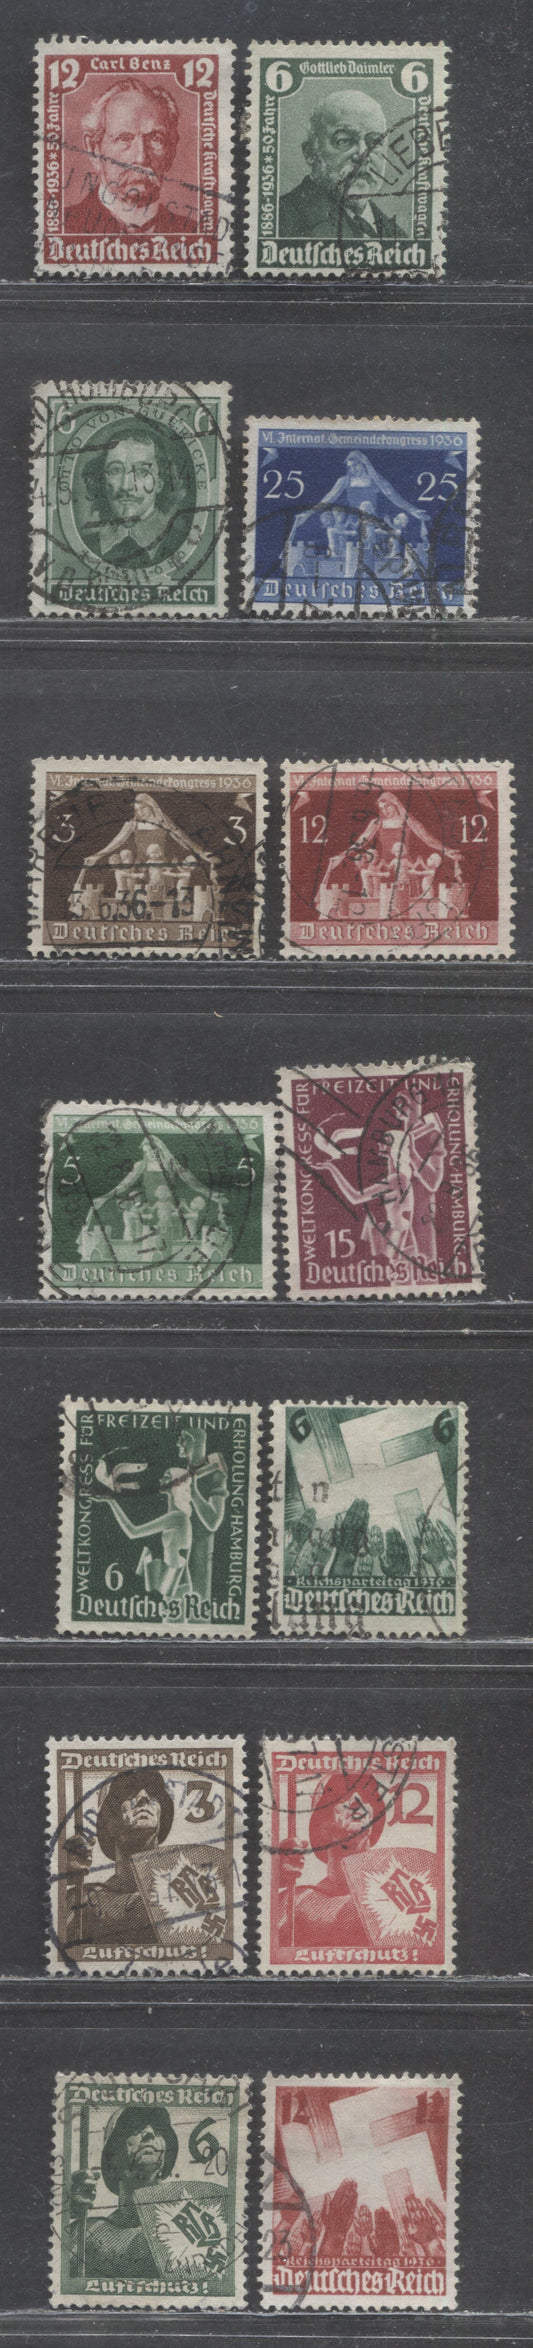 Lot 69 Germany SC#470-483 1936-1937 50th Anniversary Of The Automobile & Motorcyle Show - Air Protection Issues, 14 F/VFOG Singles, Click on Listing to See ALL Pictures, Estimated Value $6